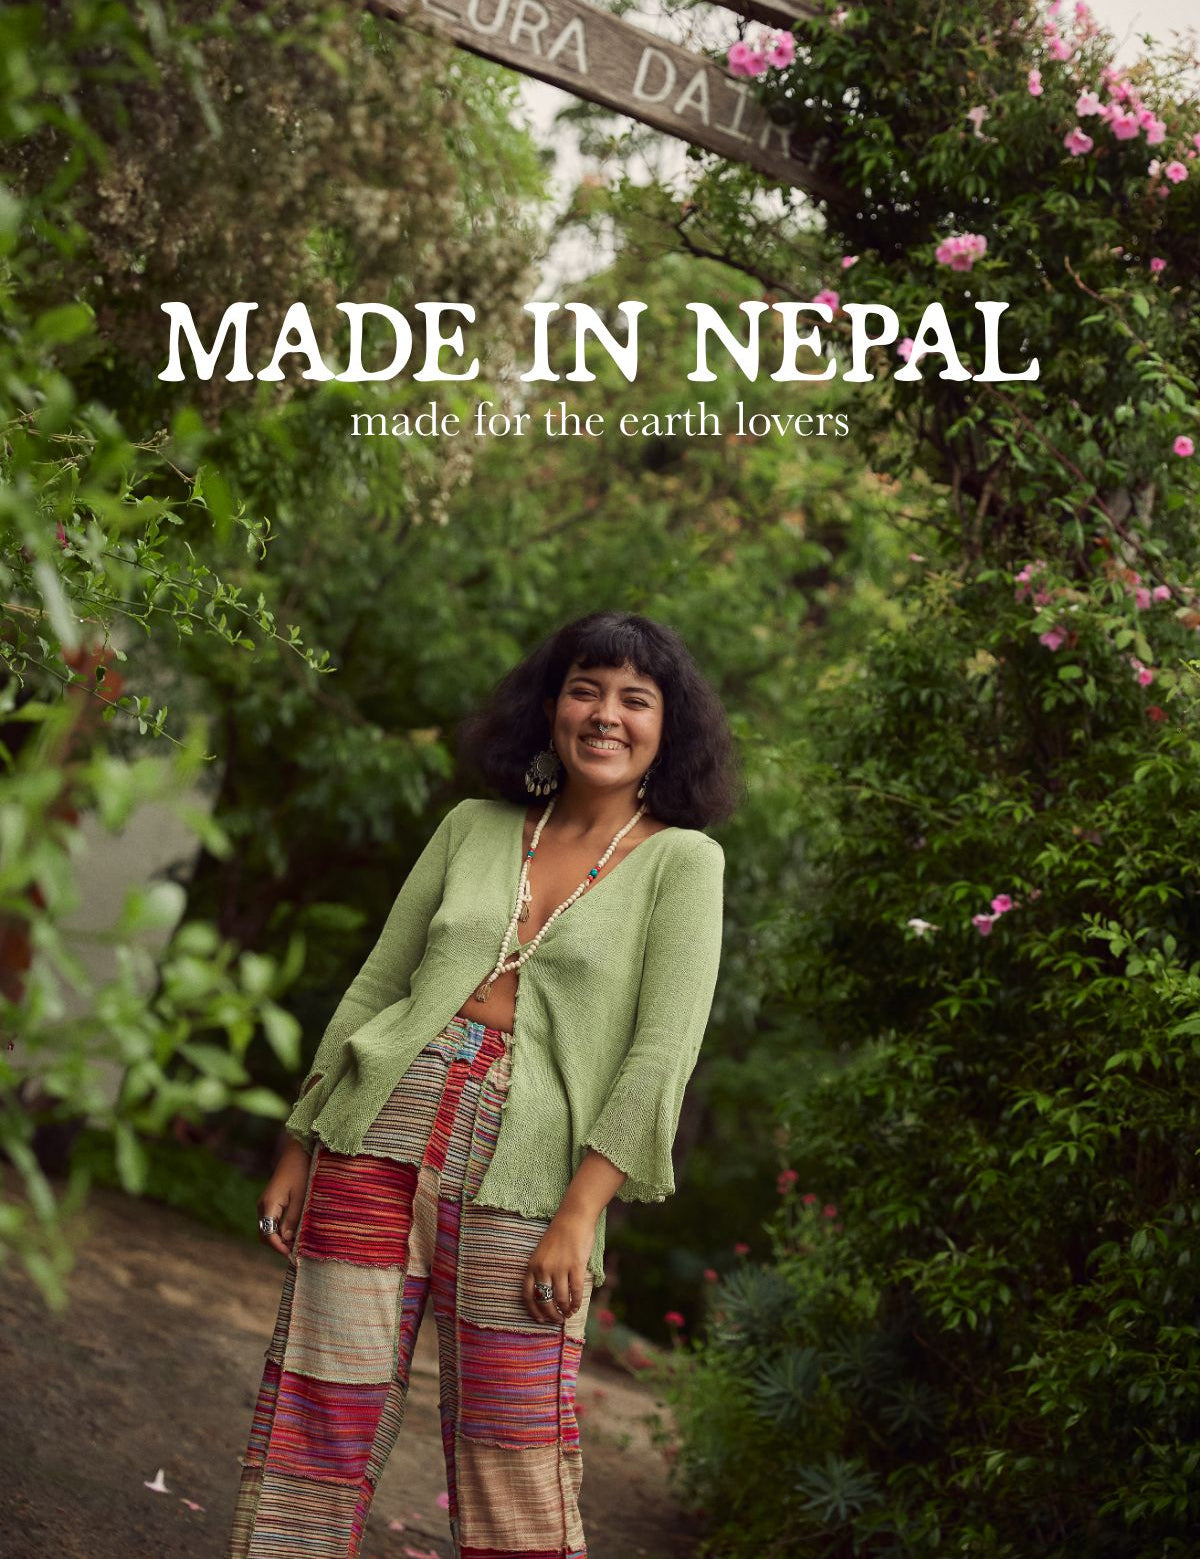 Made in Nepal: a look inside